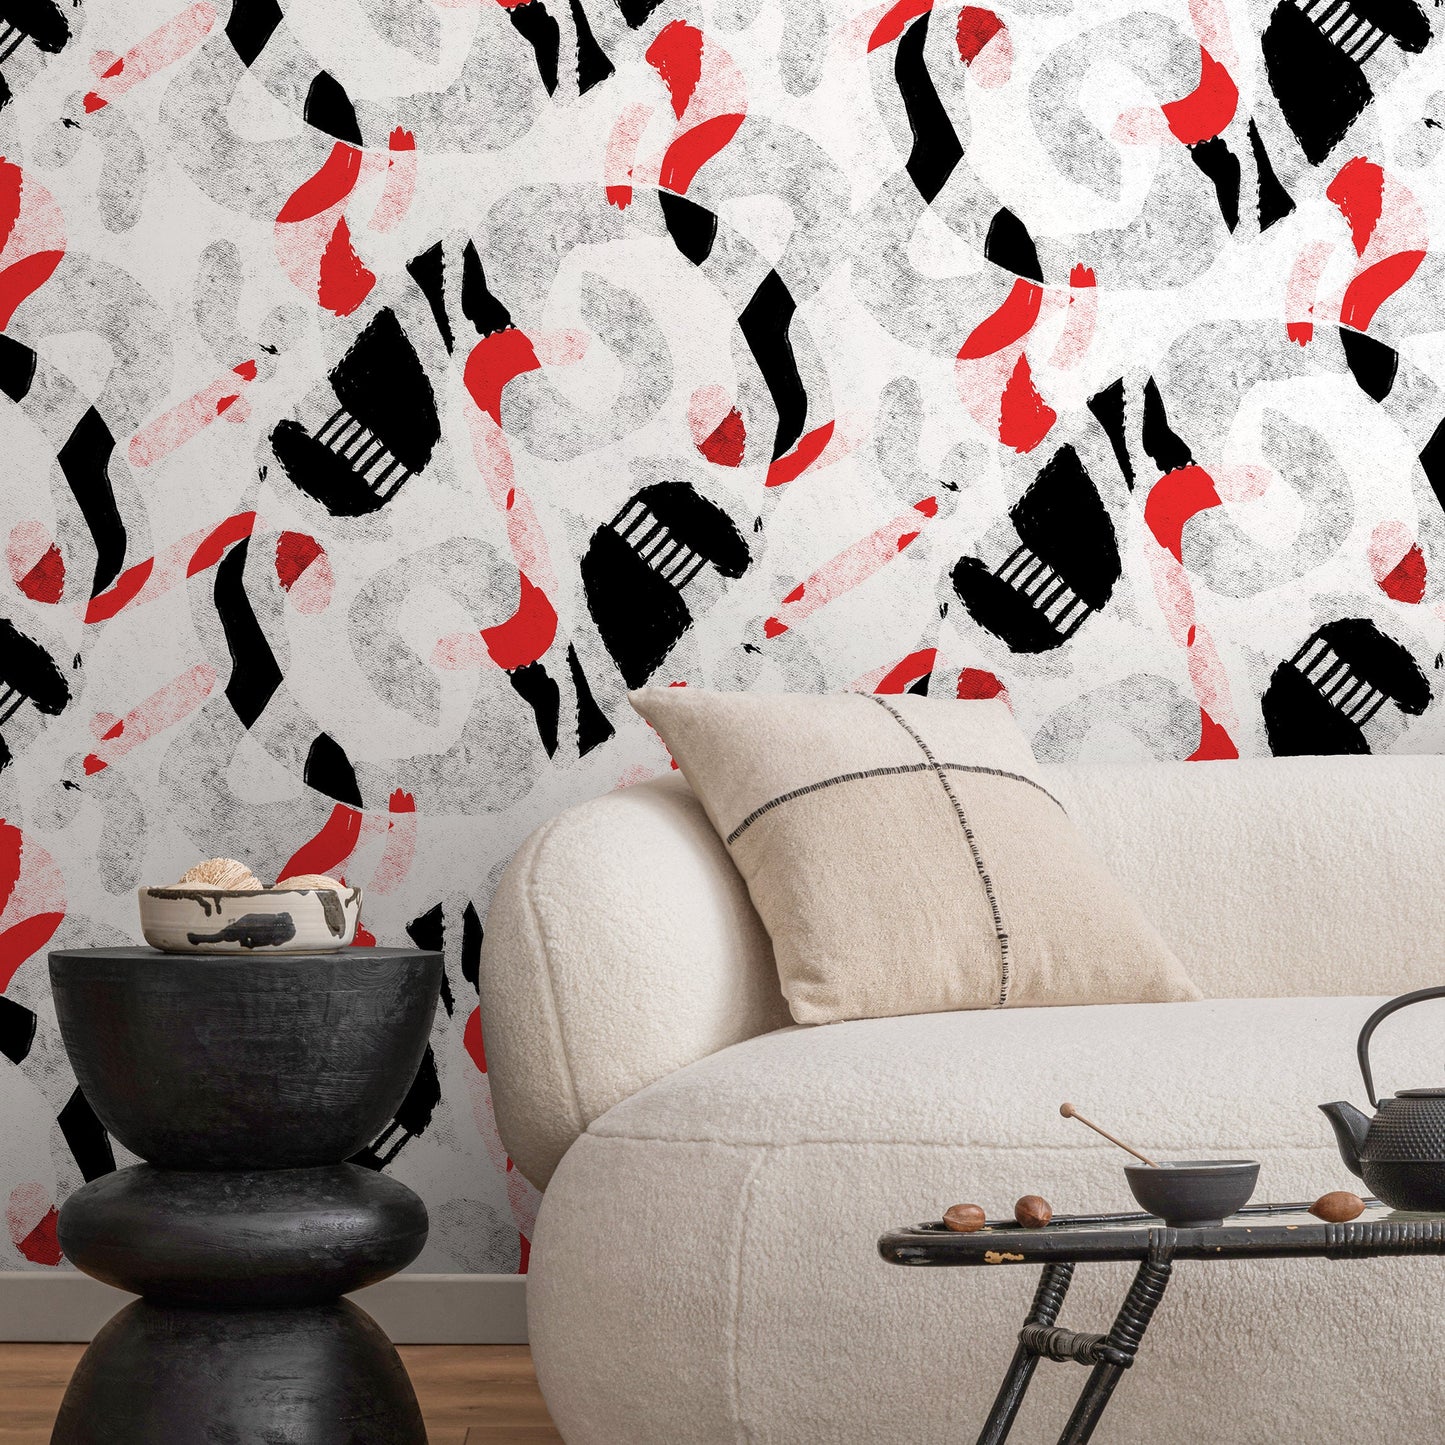 Peel and Stick Wallpaper Removable Wallpaper Wall Decor Home Decor Wall Art Printable Wall Art / Abstract Contemporary Wallpaper - X106